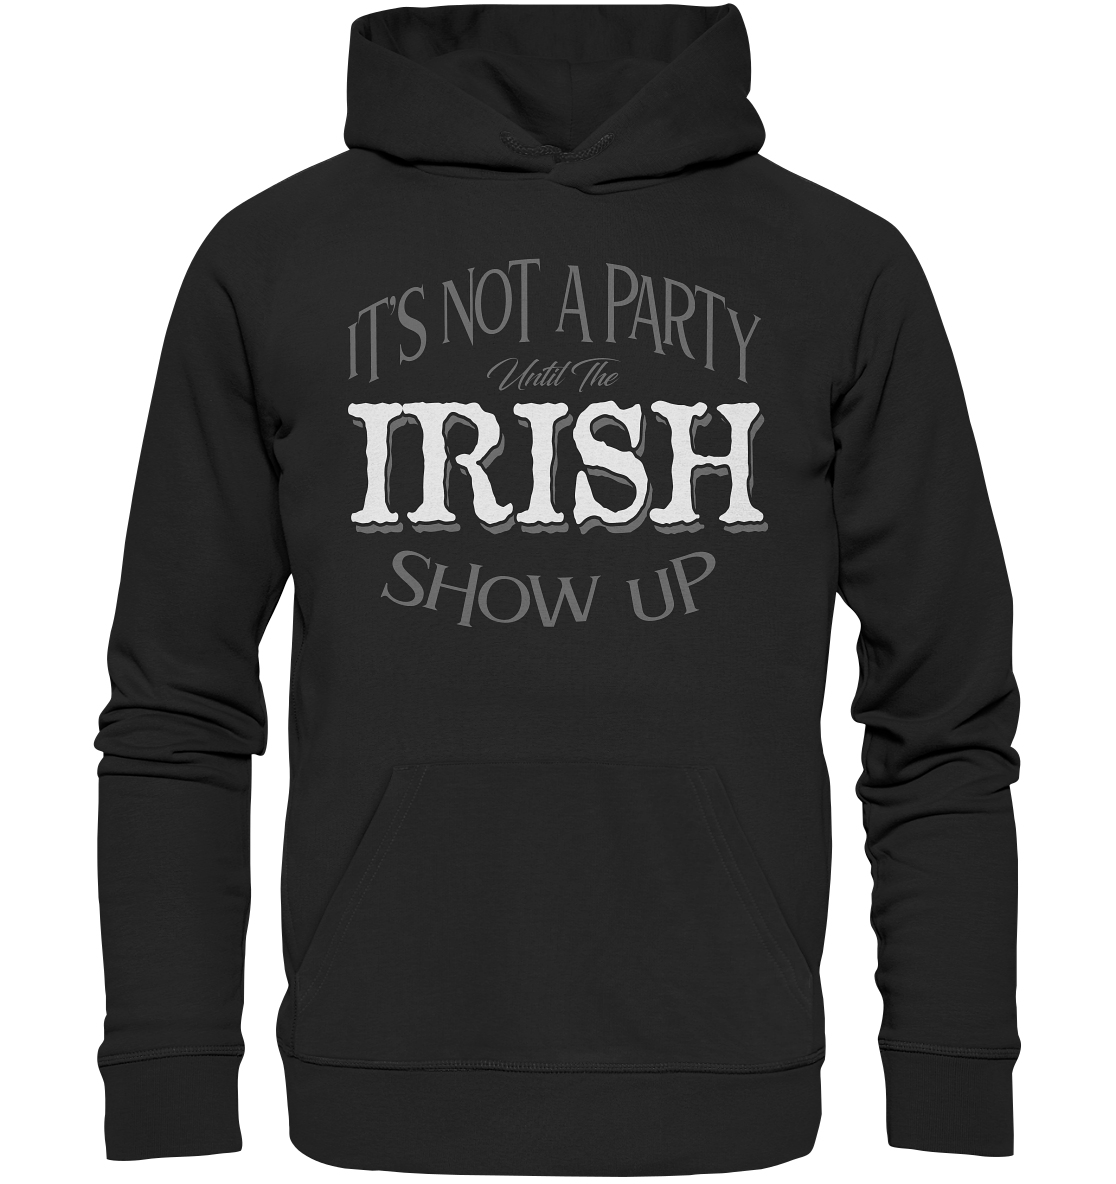 It's Not A Party Until The Irish Show Up - Premium Unisex Hoodie